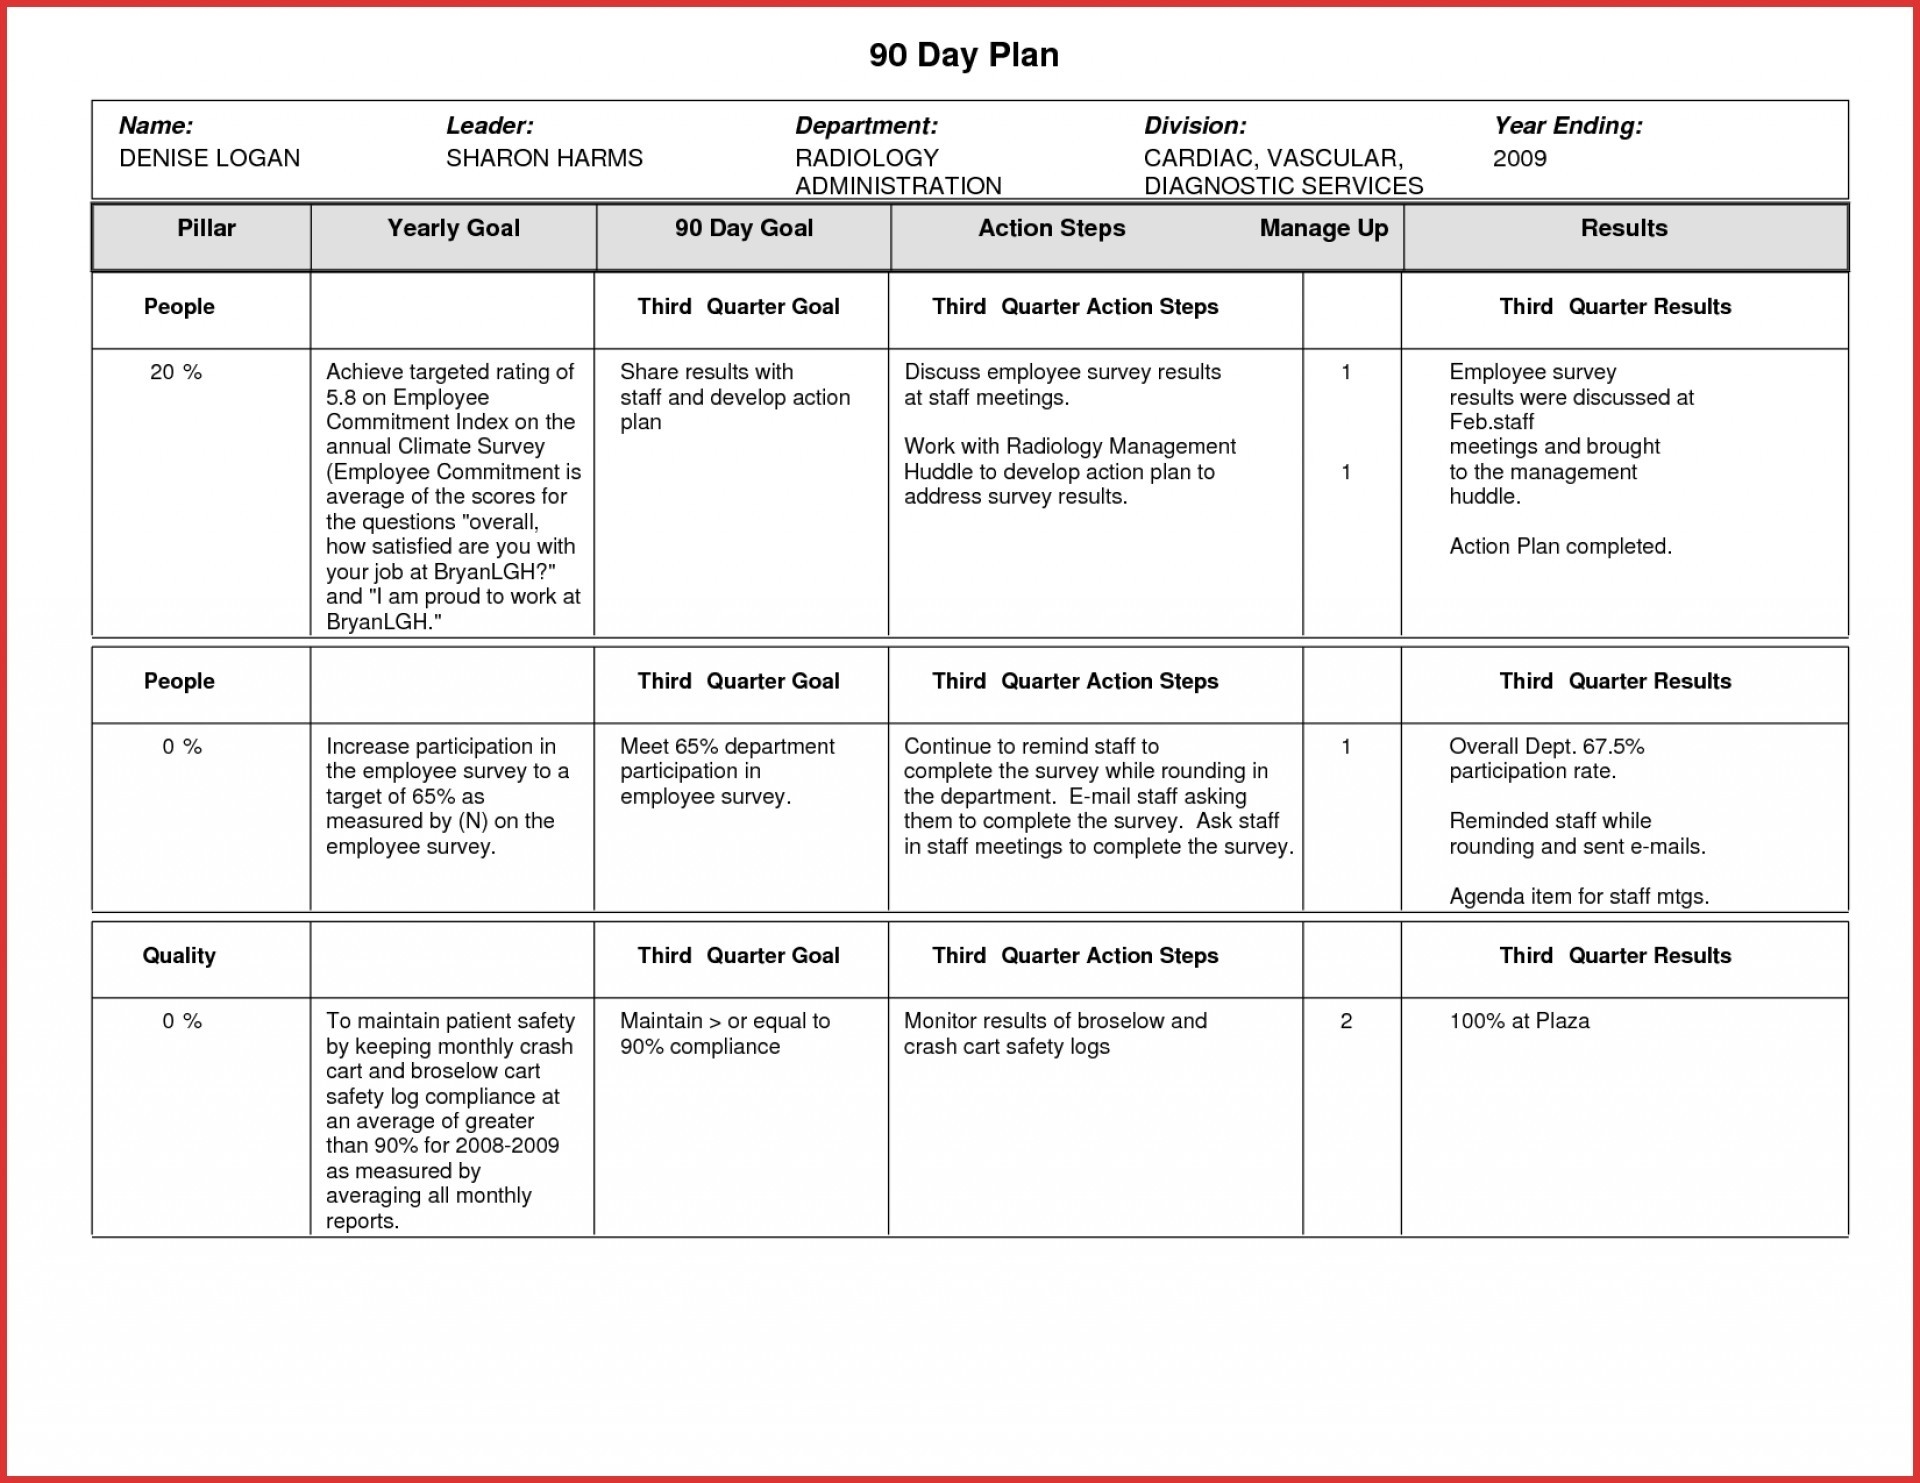 004 Day Plan Template Elegant Example Of For New Job-Blank Template For 30 Days